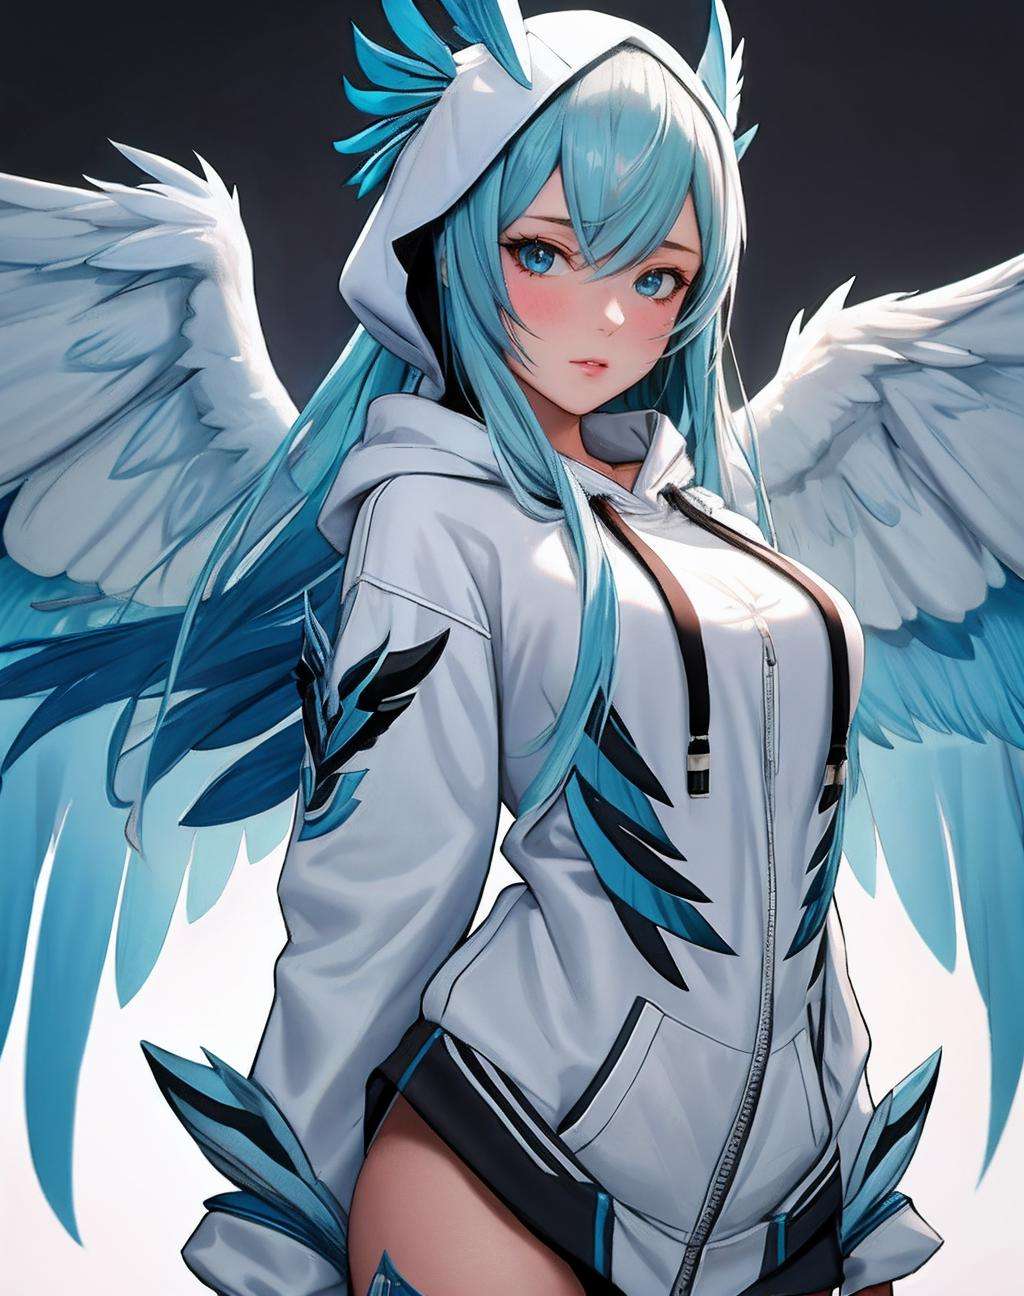 ((Masterpiece, best quality)),photography, detailed skin, realistic, photo-realistic, 8k, highly detailed, full length frame, High detail RAW color art, diffused soft lighting, shallow depth of field, sharp focus, hyperrealism, cinematic lightingedgGaruda_hoodie, a white and blue bird_woman with wings wearing an (oversize hoodie) ,wearing edgGaruda_hoodie <lora:edgGarudaHoodies:0.775>